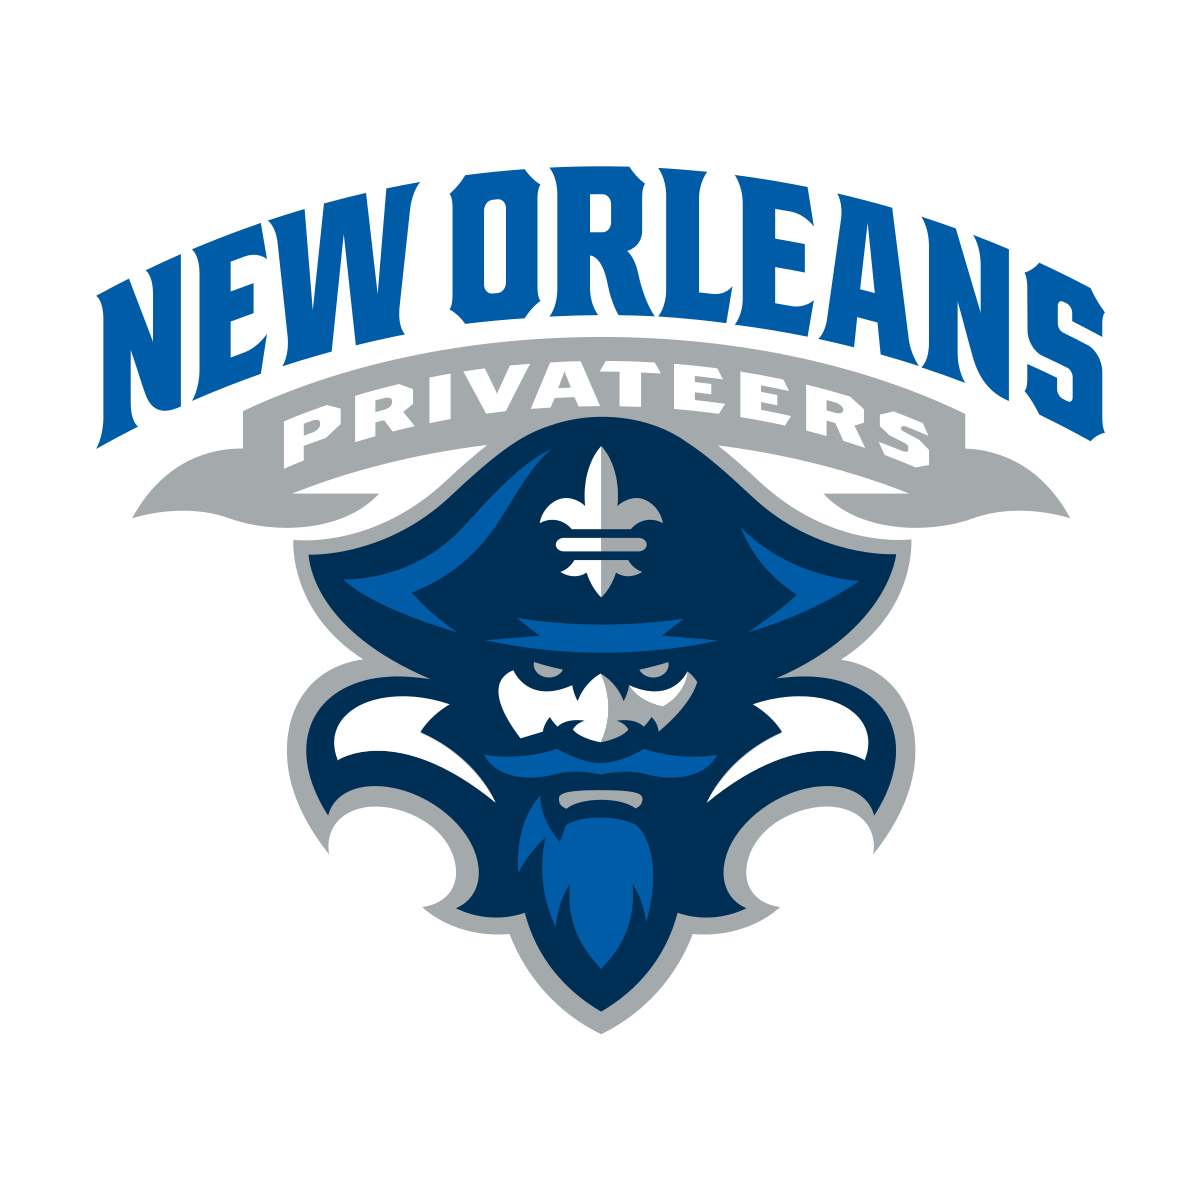 New Orleans Privateers logo PNG